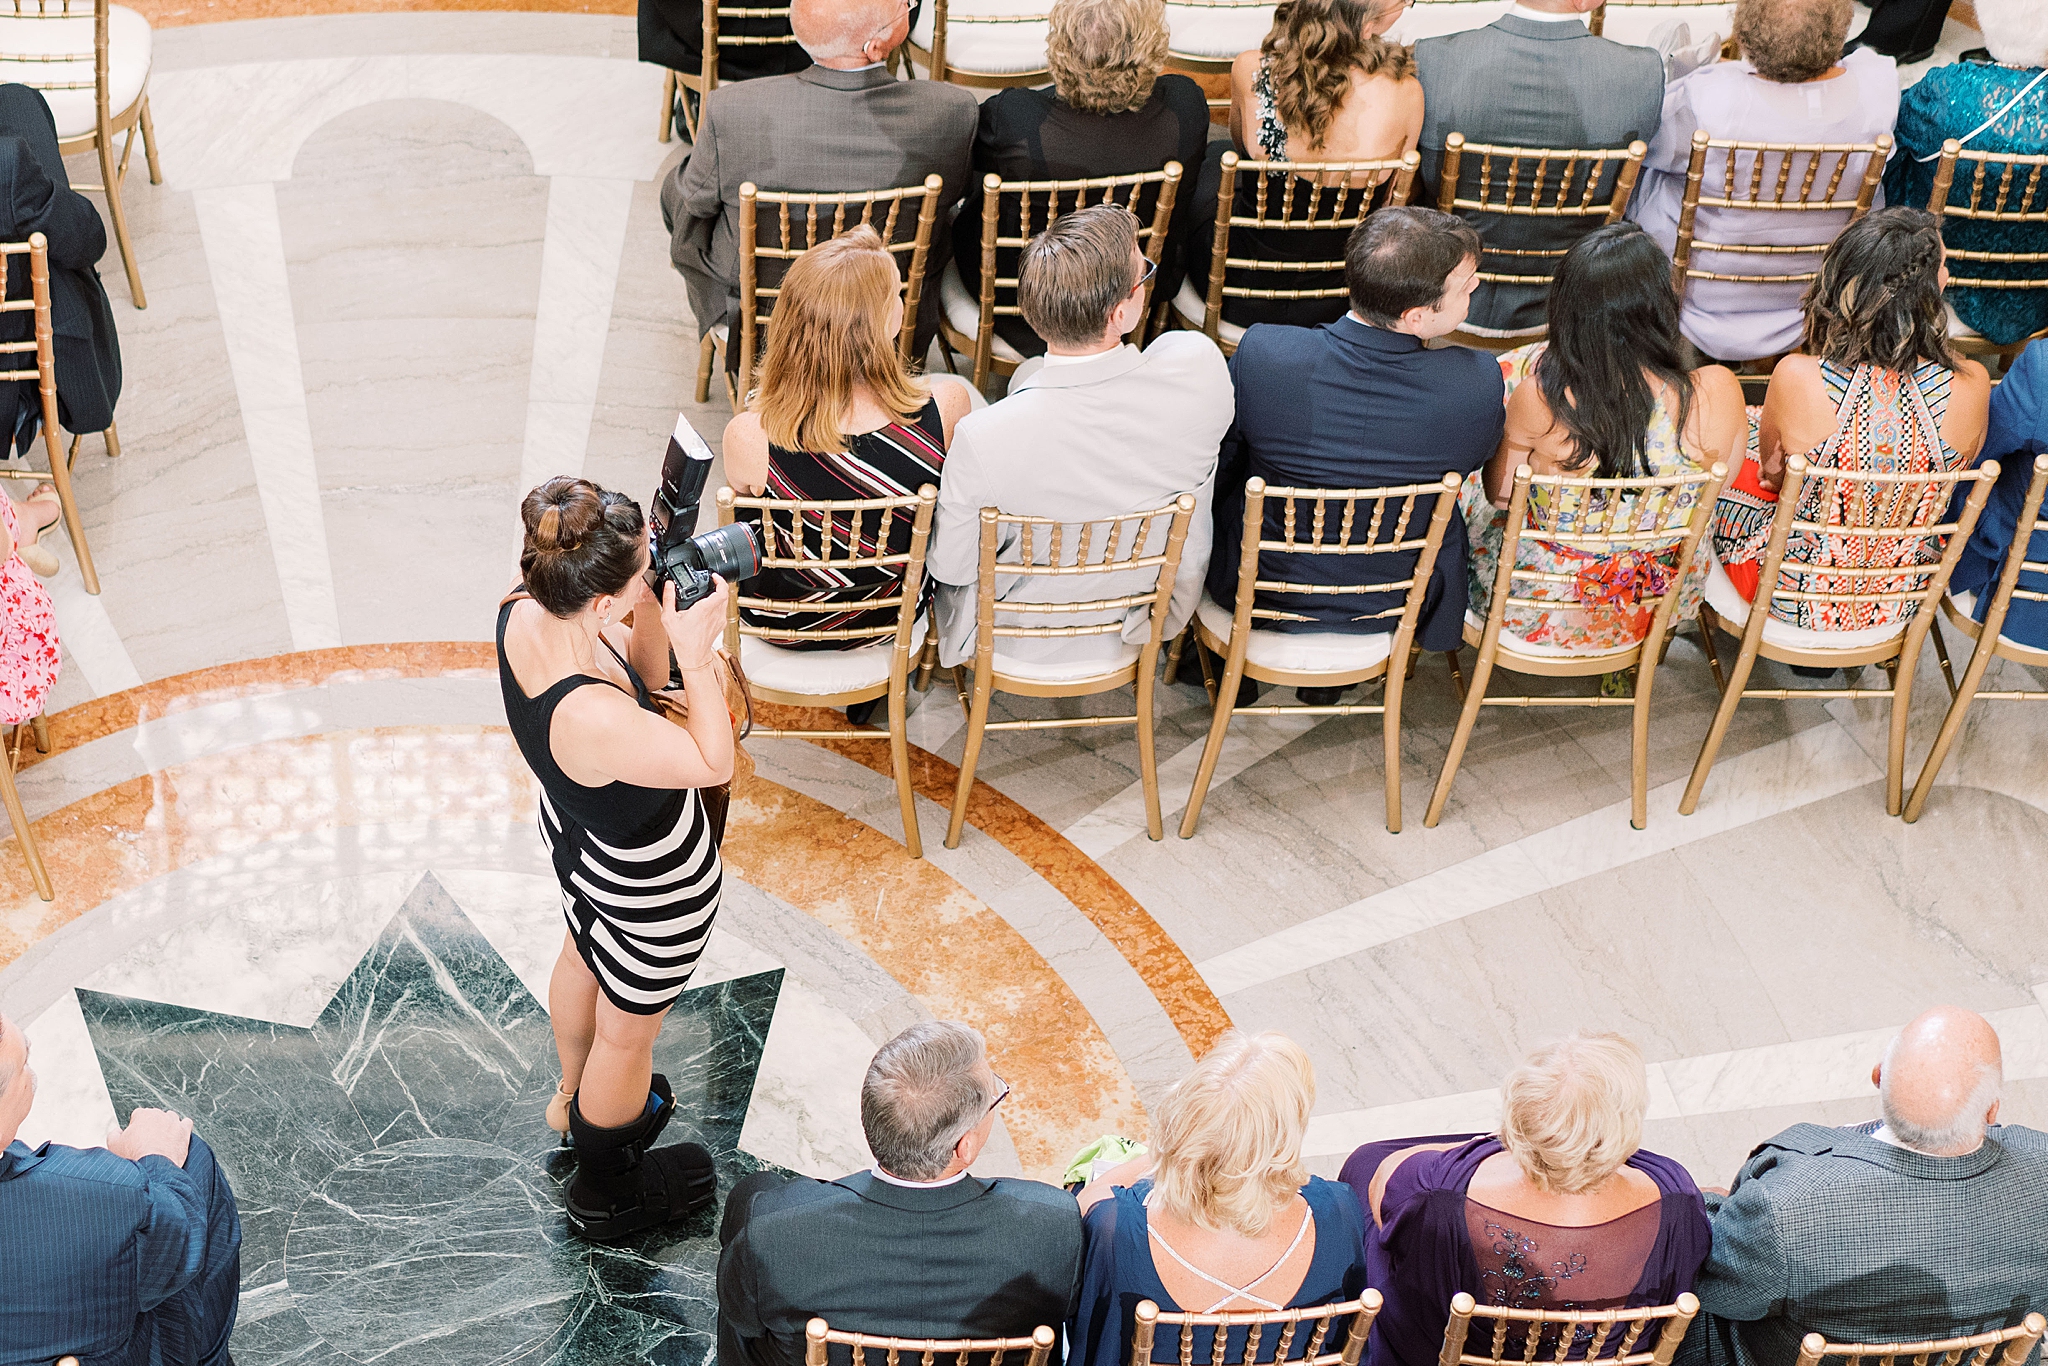 This Washington, DC wedding photographer provides a how-to guide on shooting a wedding or session with a broken foot.